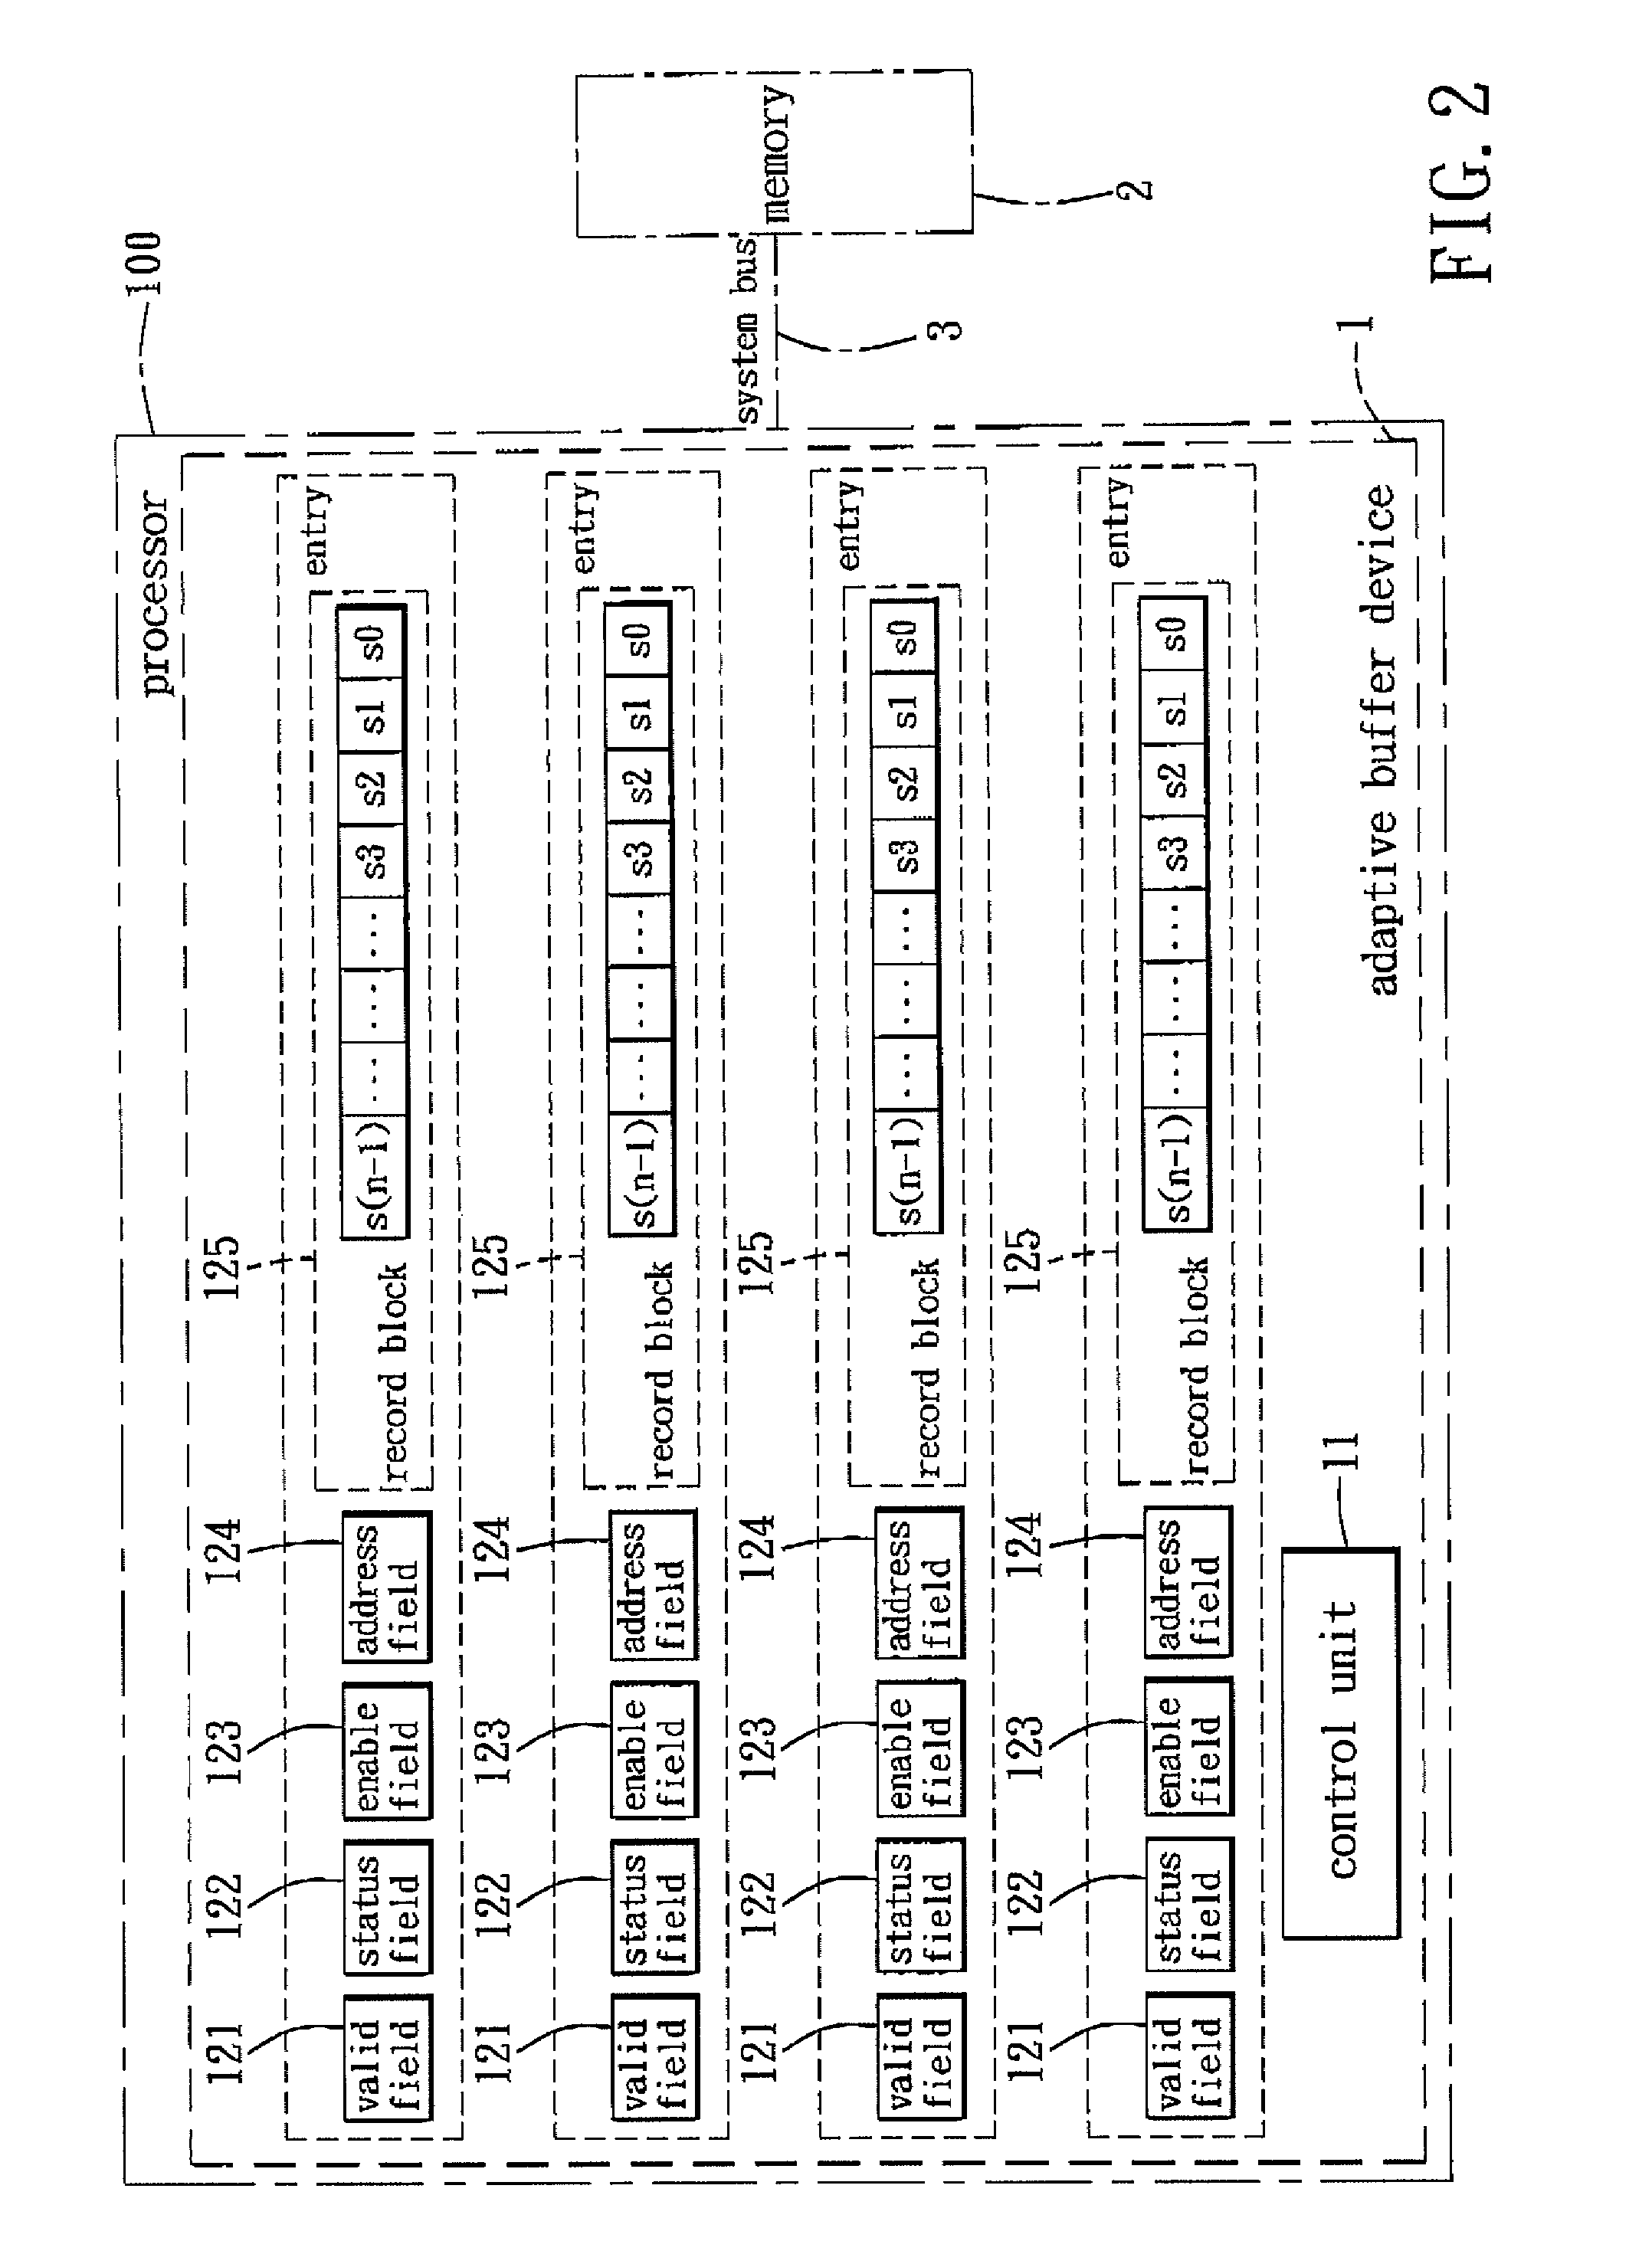 Adaptive buffer device and method thereof